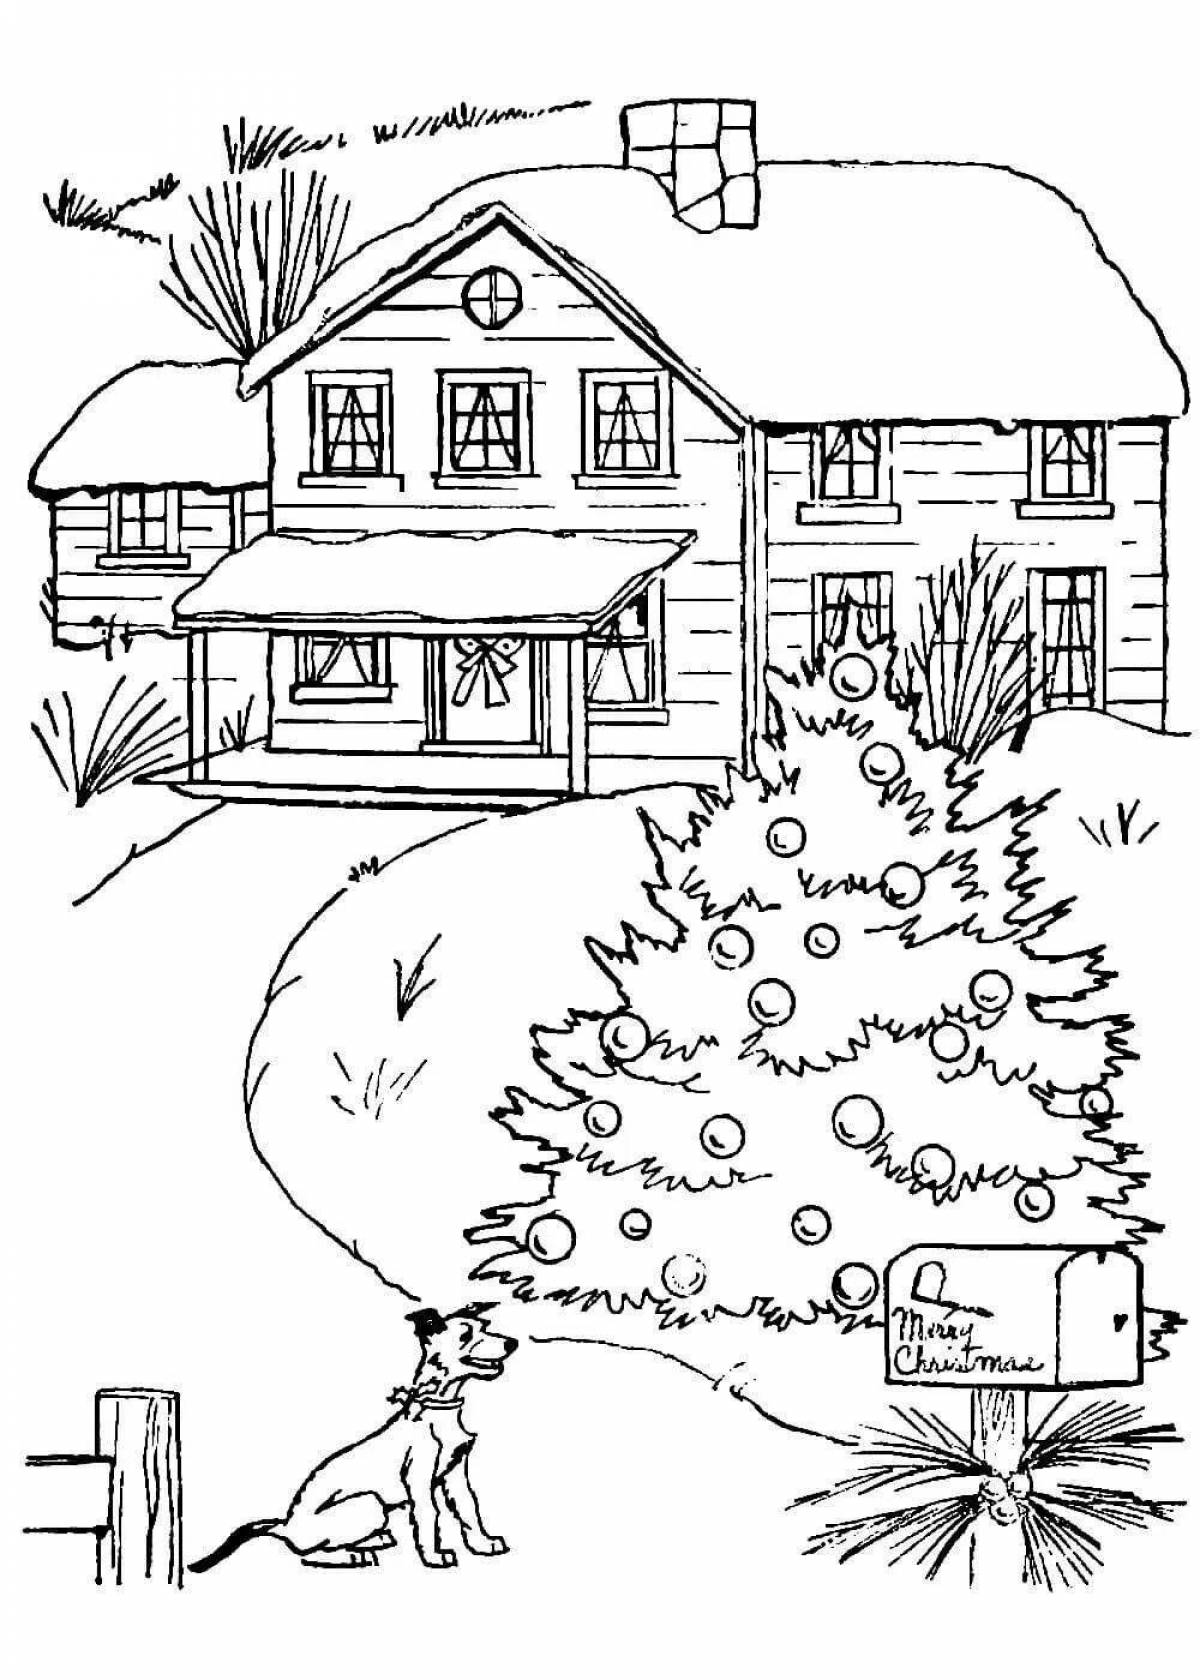 Coloring page magical winter village